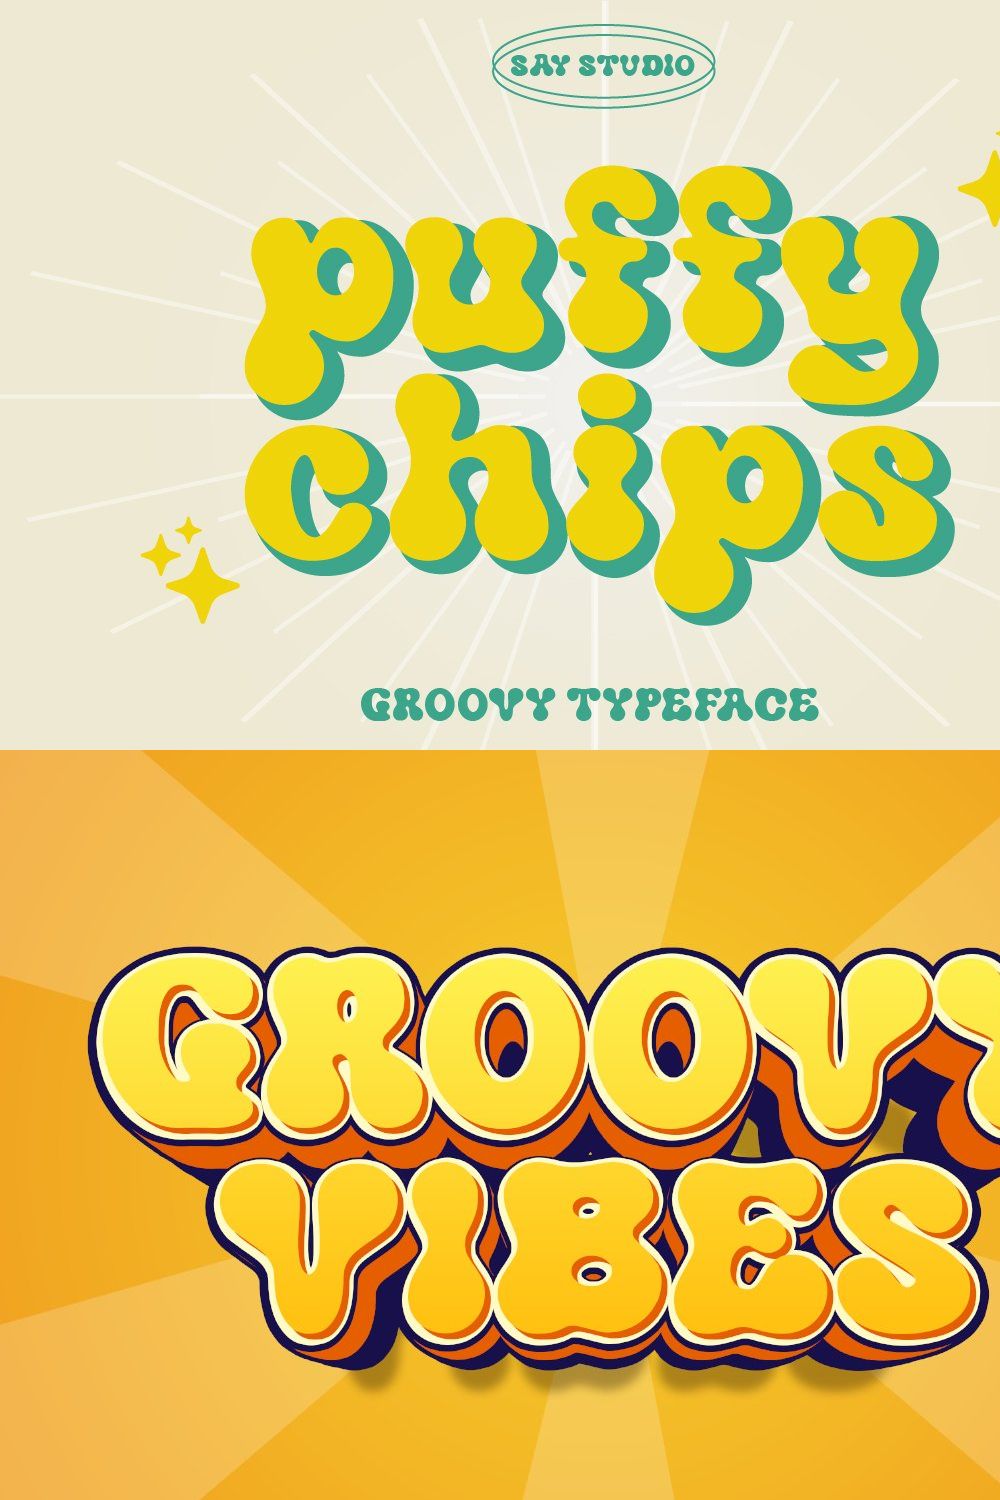 puffy chips retro typeface pinterest preview image.